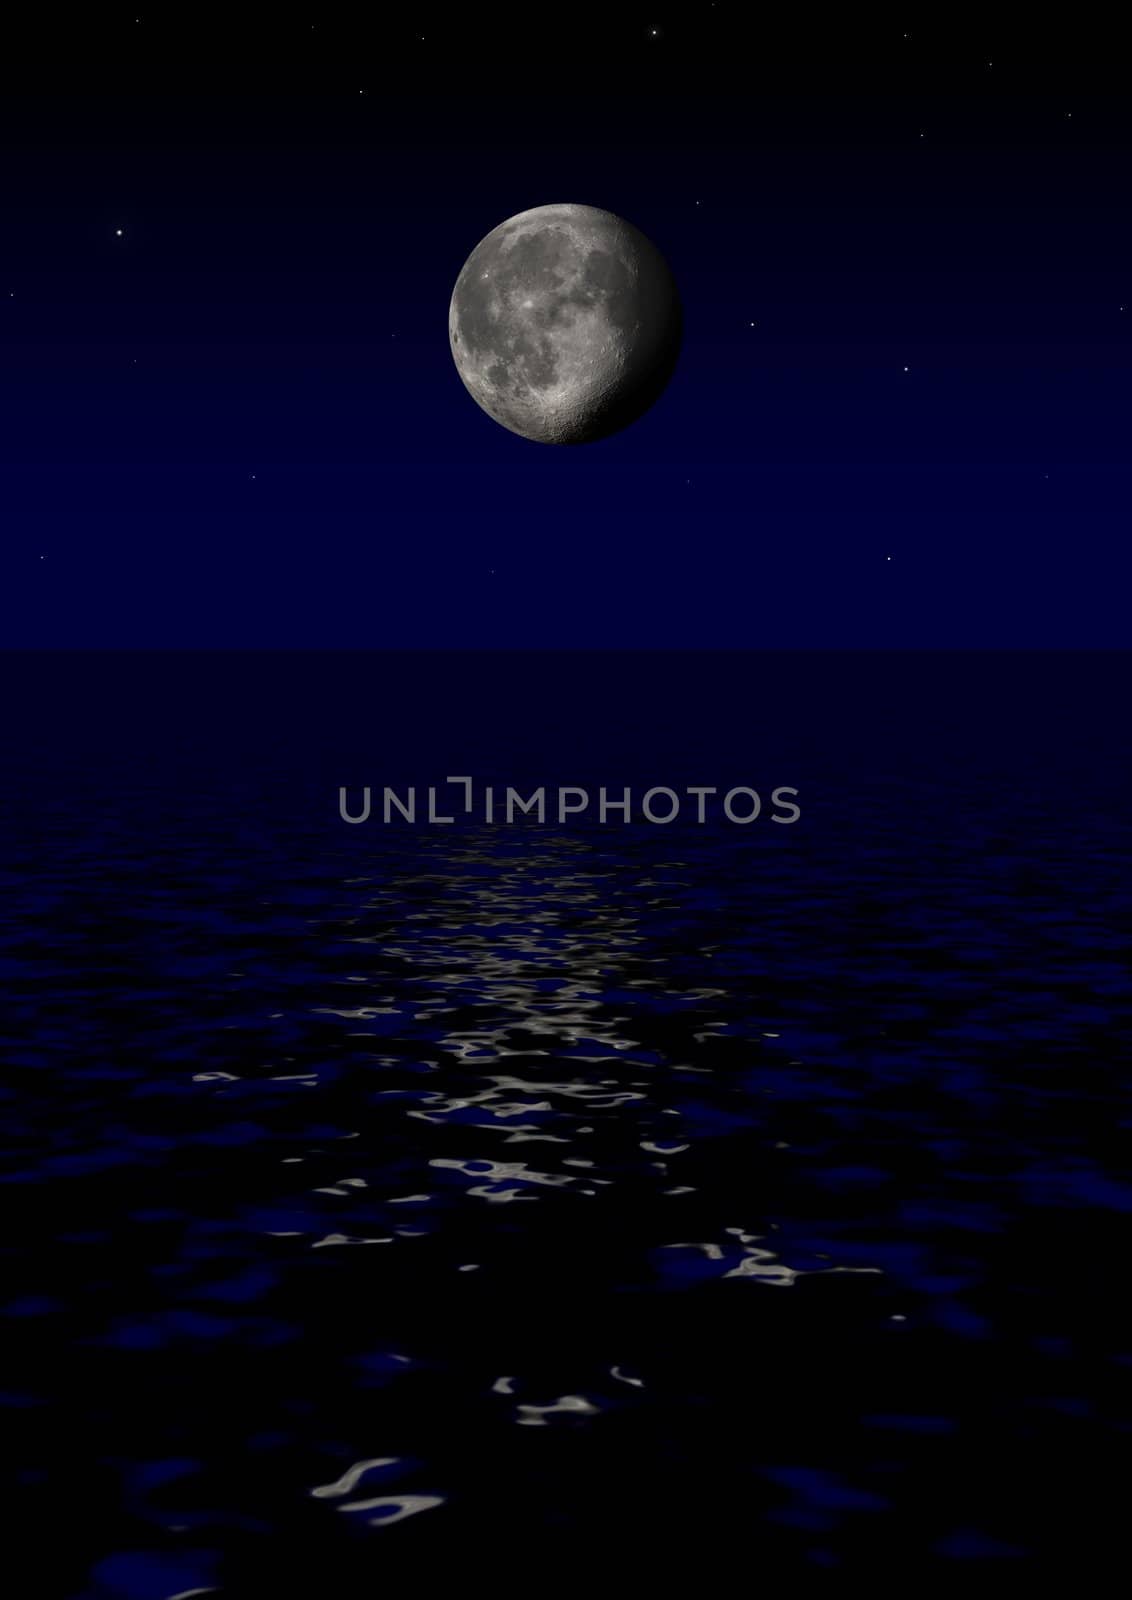 Illustration of a full moon over a reflective sea